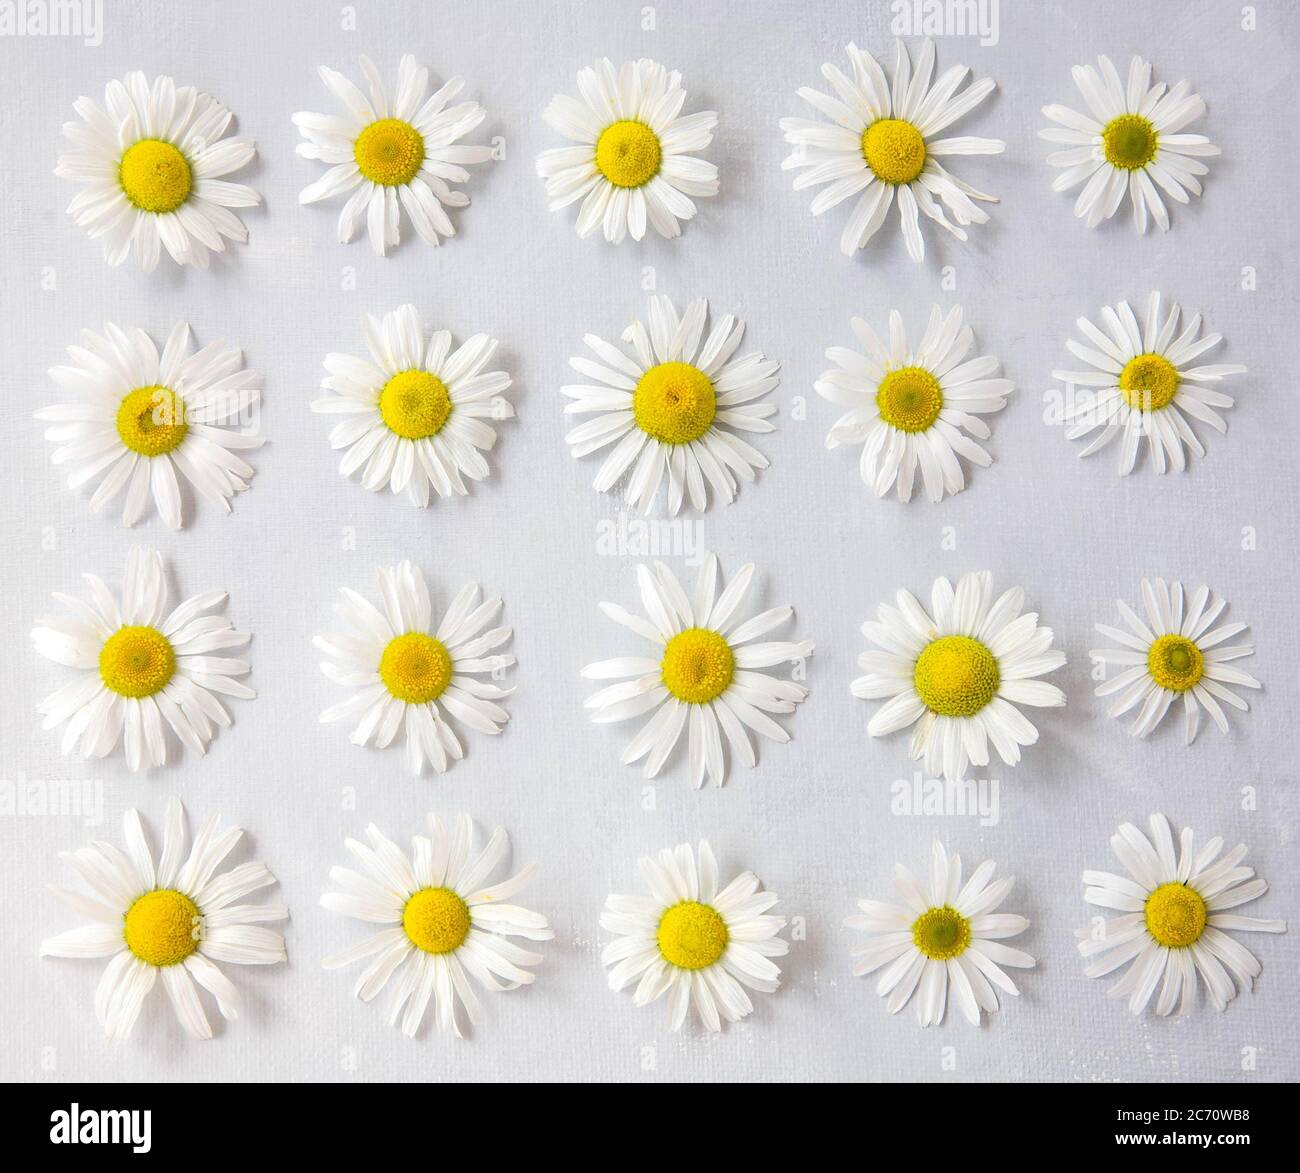 Flower arrangement of daisies on a gray background, top view, flat lay. Spring, summer concept. Stock Photo